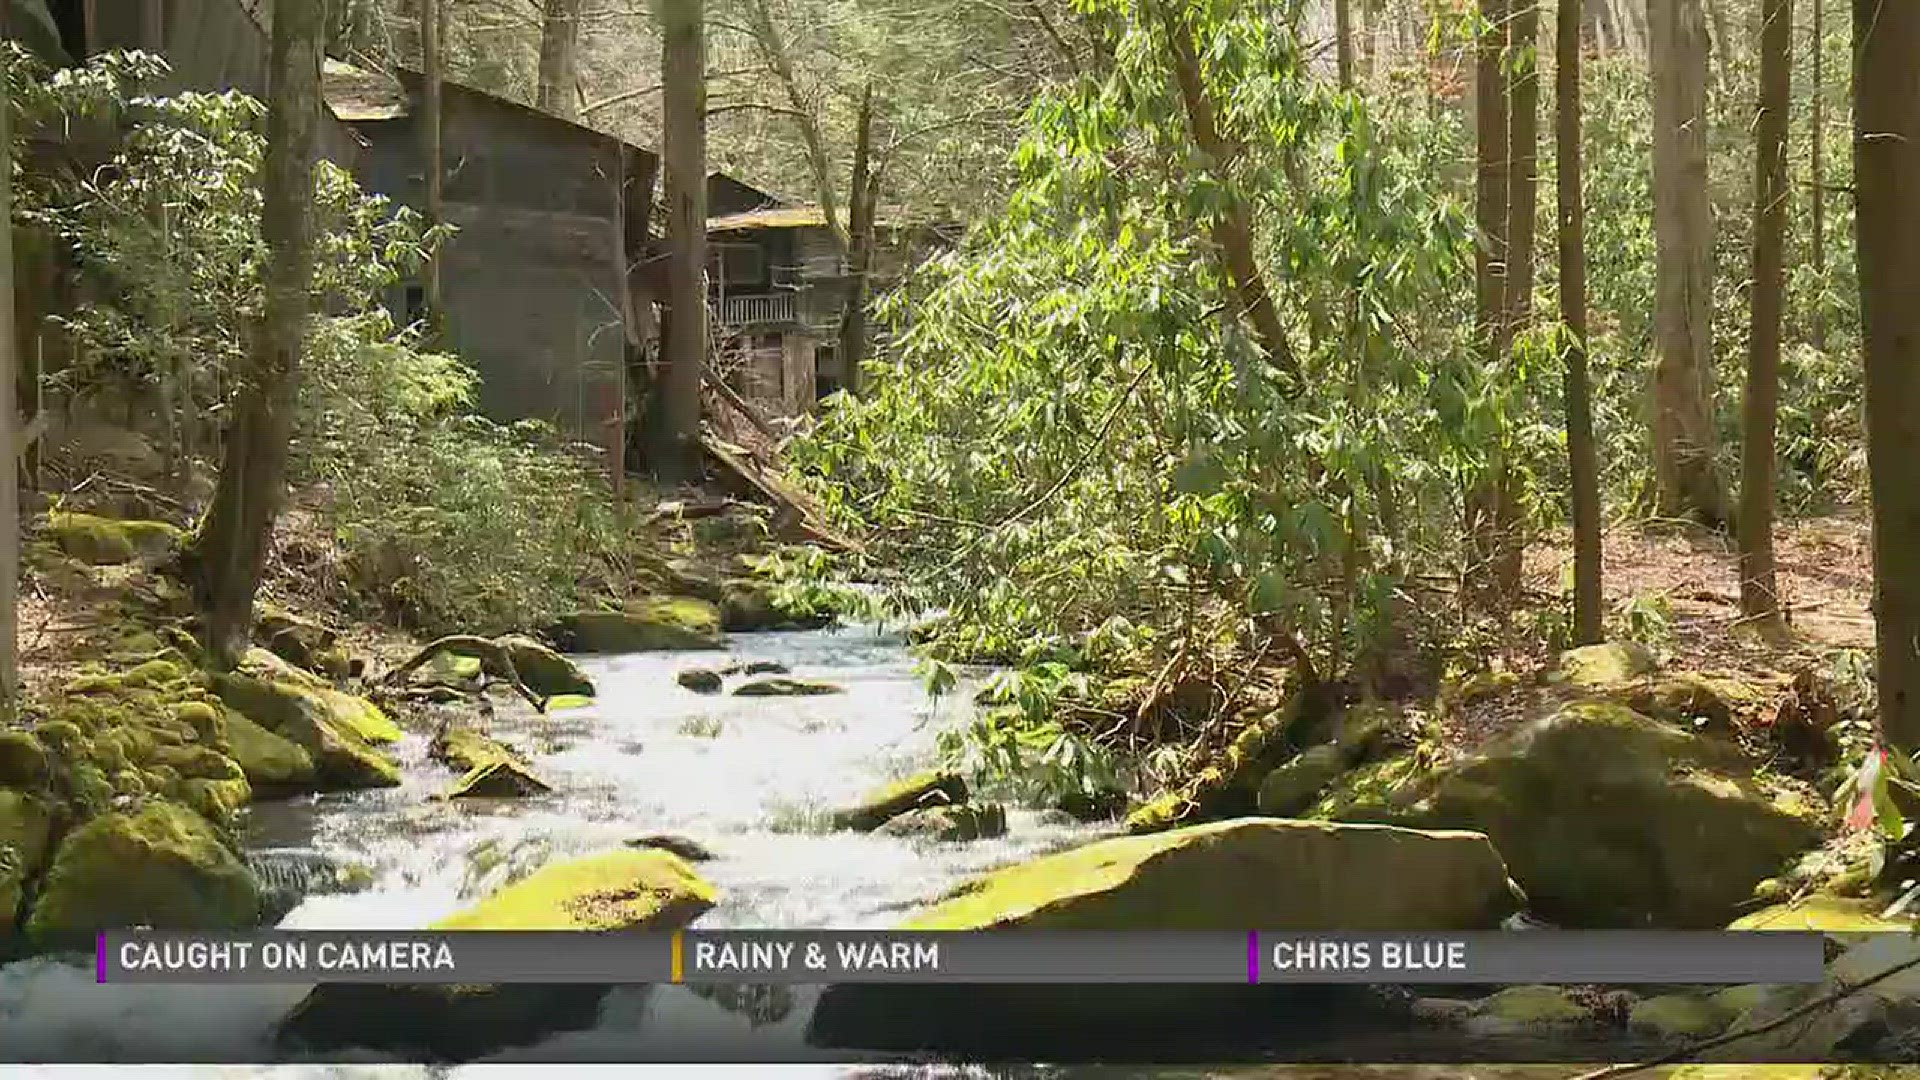 April 21, 2017: Demolition crews are knocking down dozens of historic cabins that have been in the Smokies for more than a century, but the real story is what led up to this point.